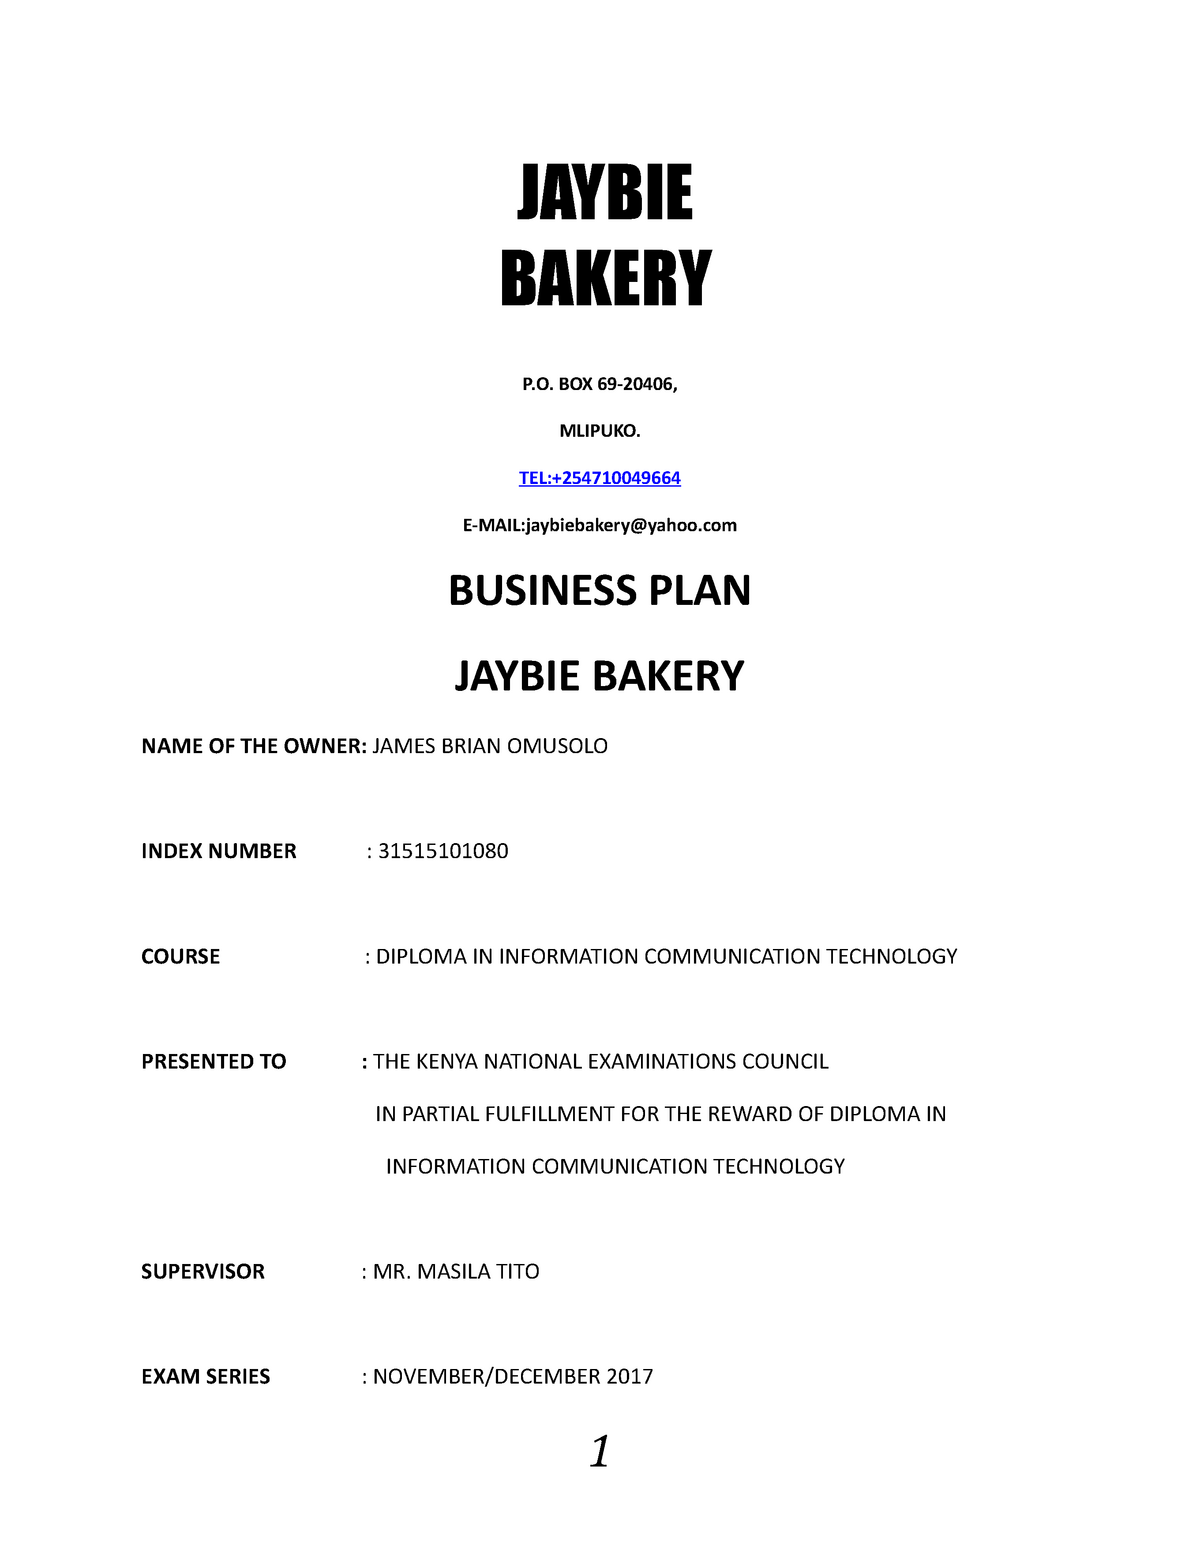 small bakery business plan philippines